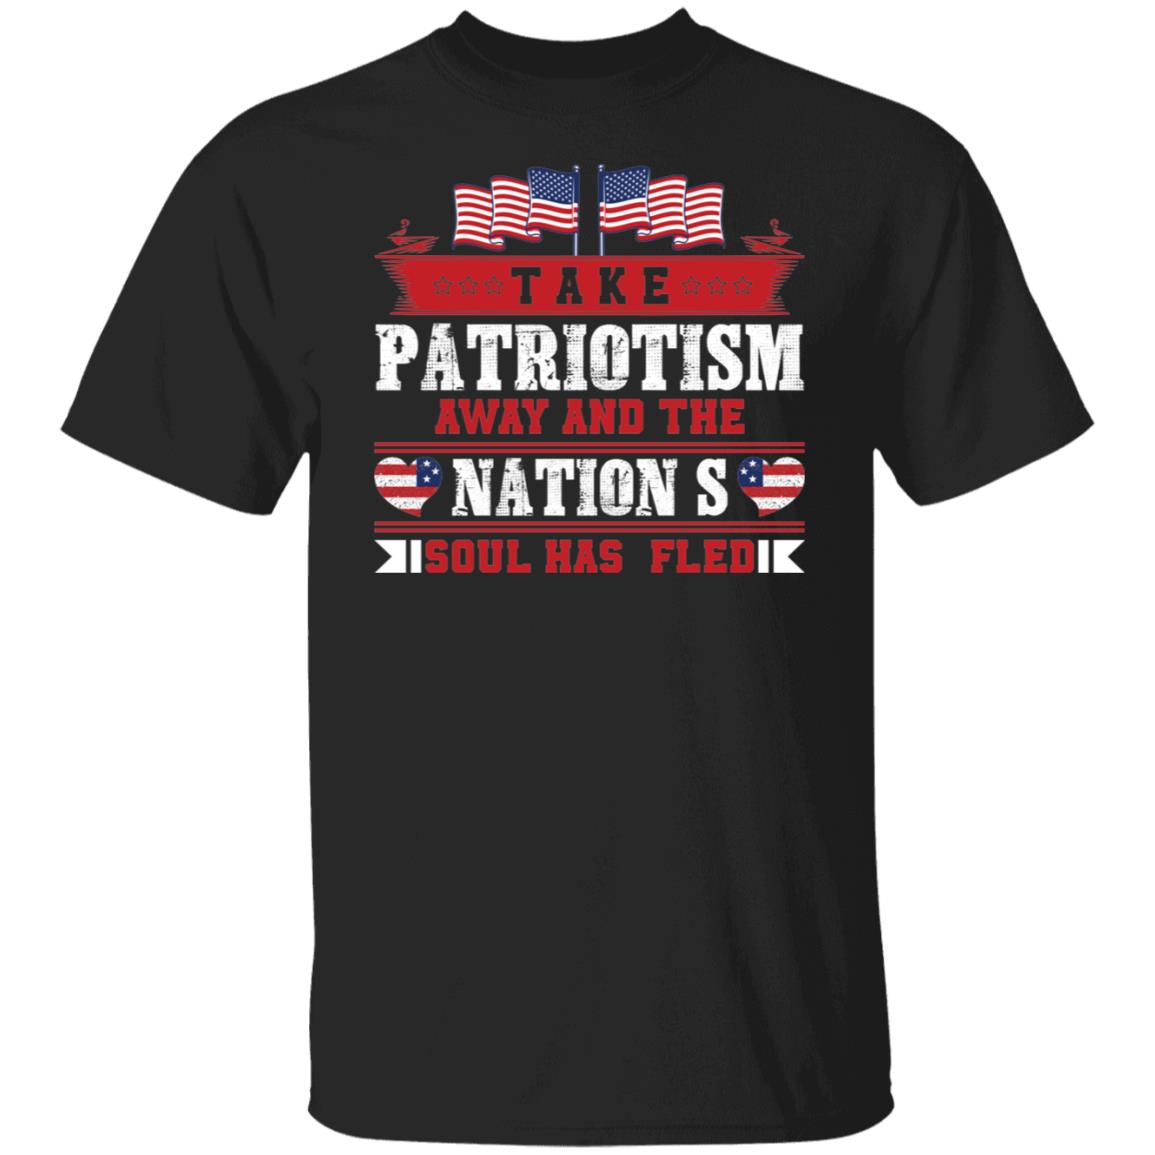 Take Patriotism away and The Nation's Soul Has Fled Shirt